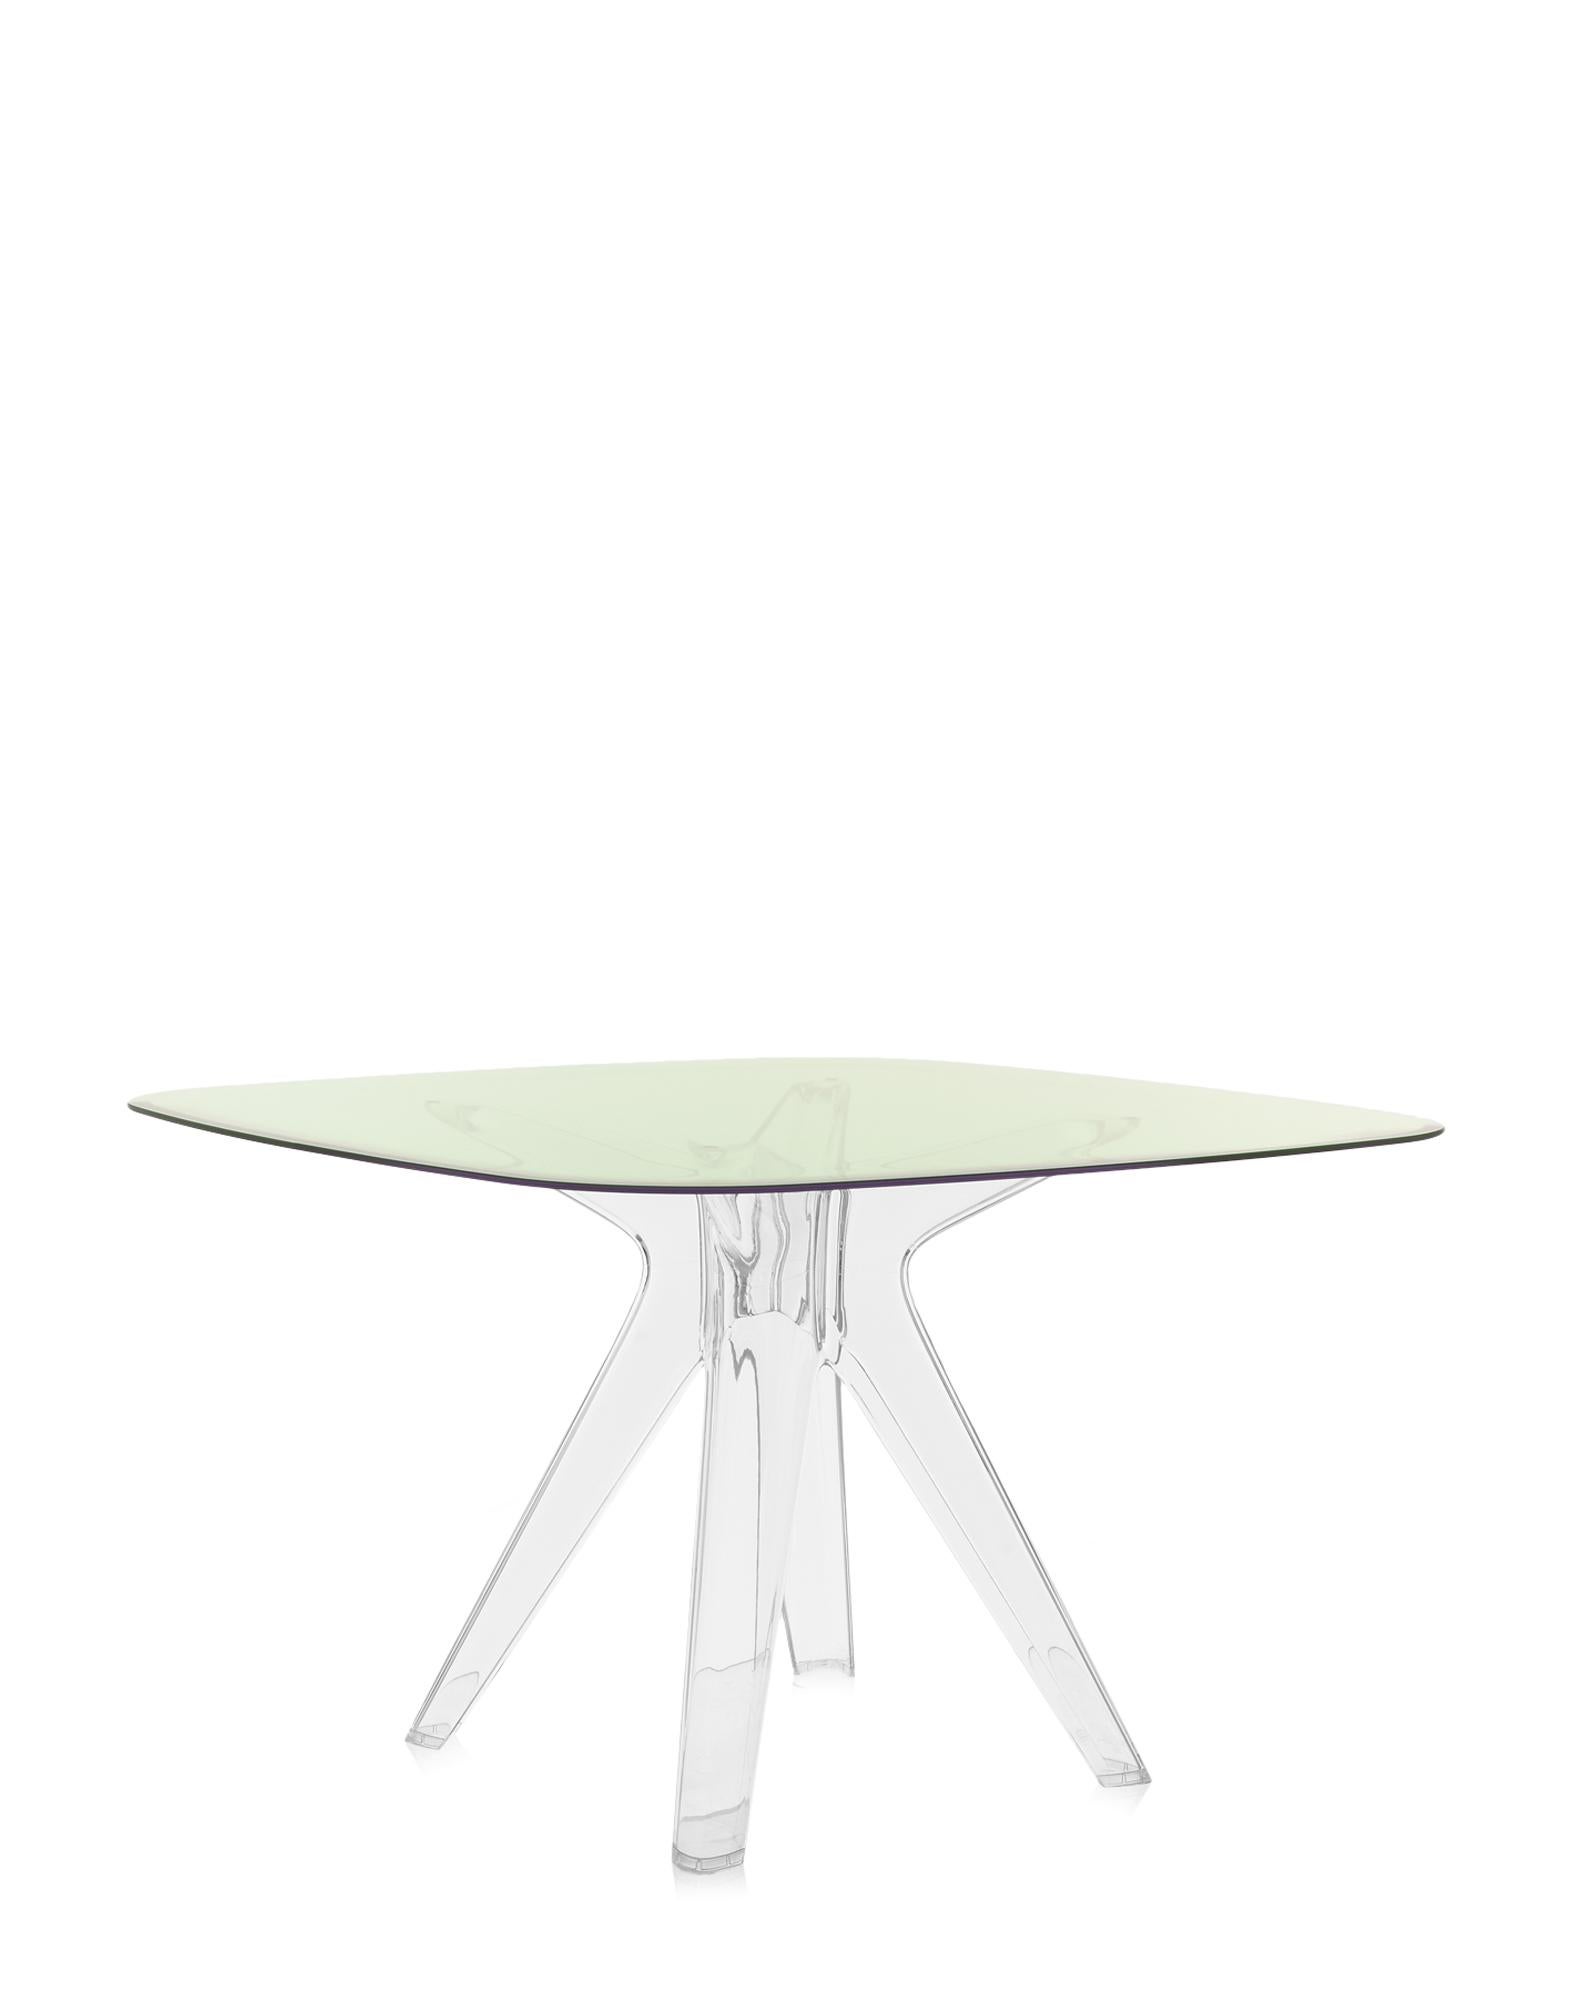 Kartell lifestyle enhances the living room with Philippe Starck’s Blast, a coffee table square with rounded corners and clear bases and tops. The design is a development of the Sir Gio table. The central core of the base is